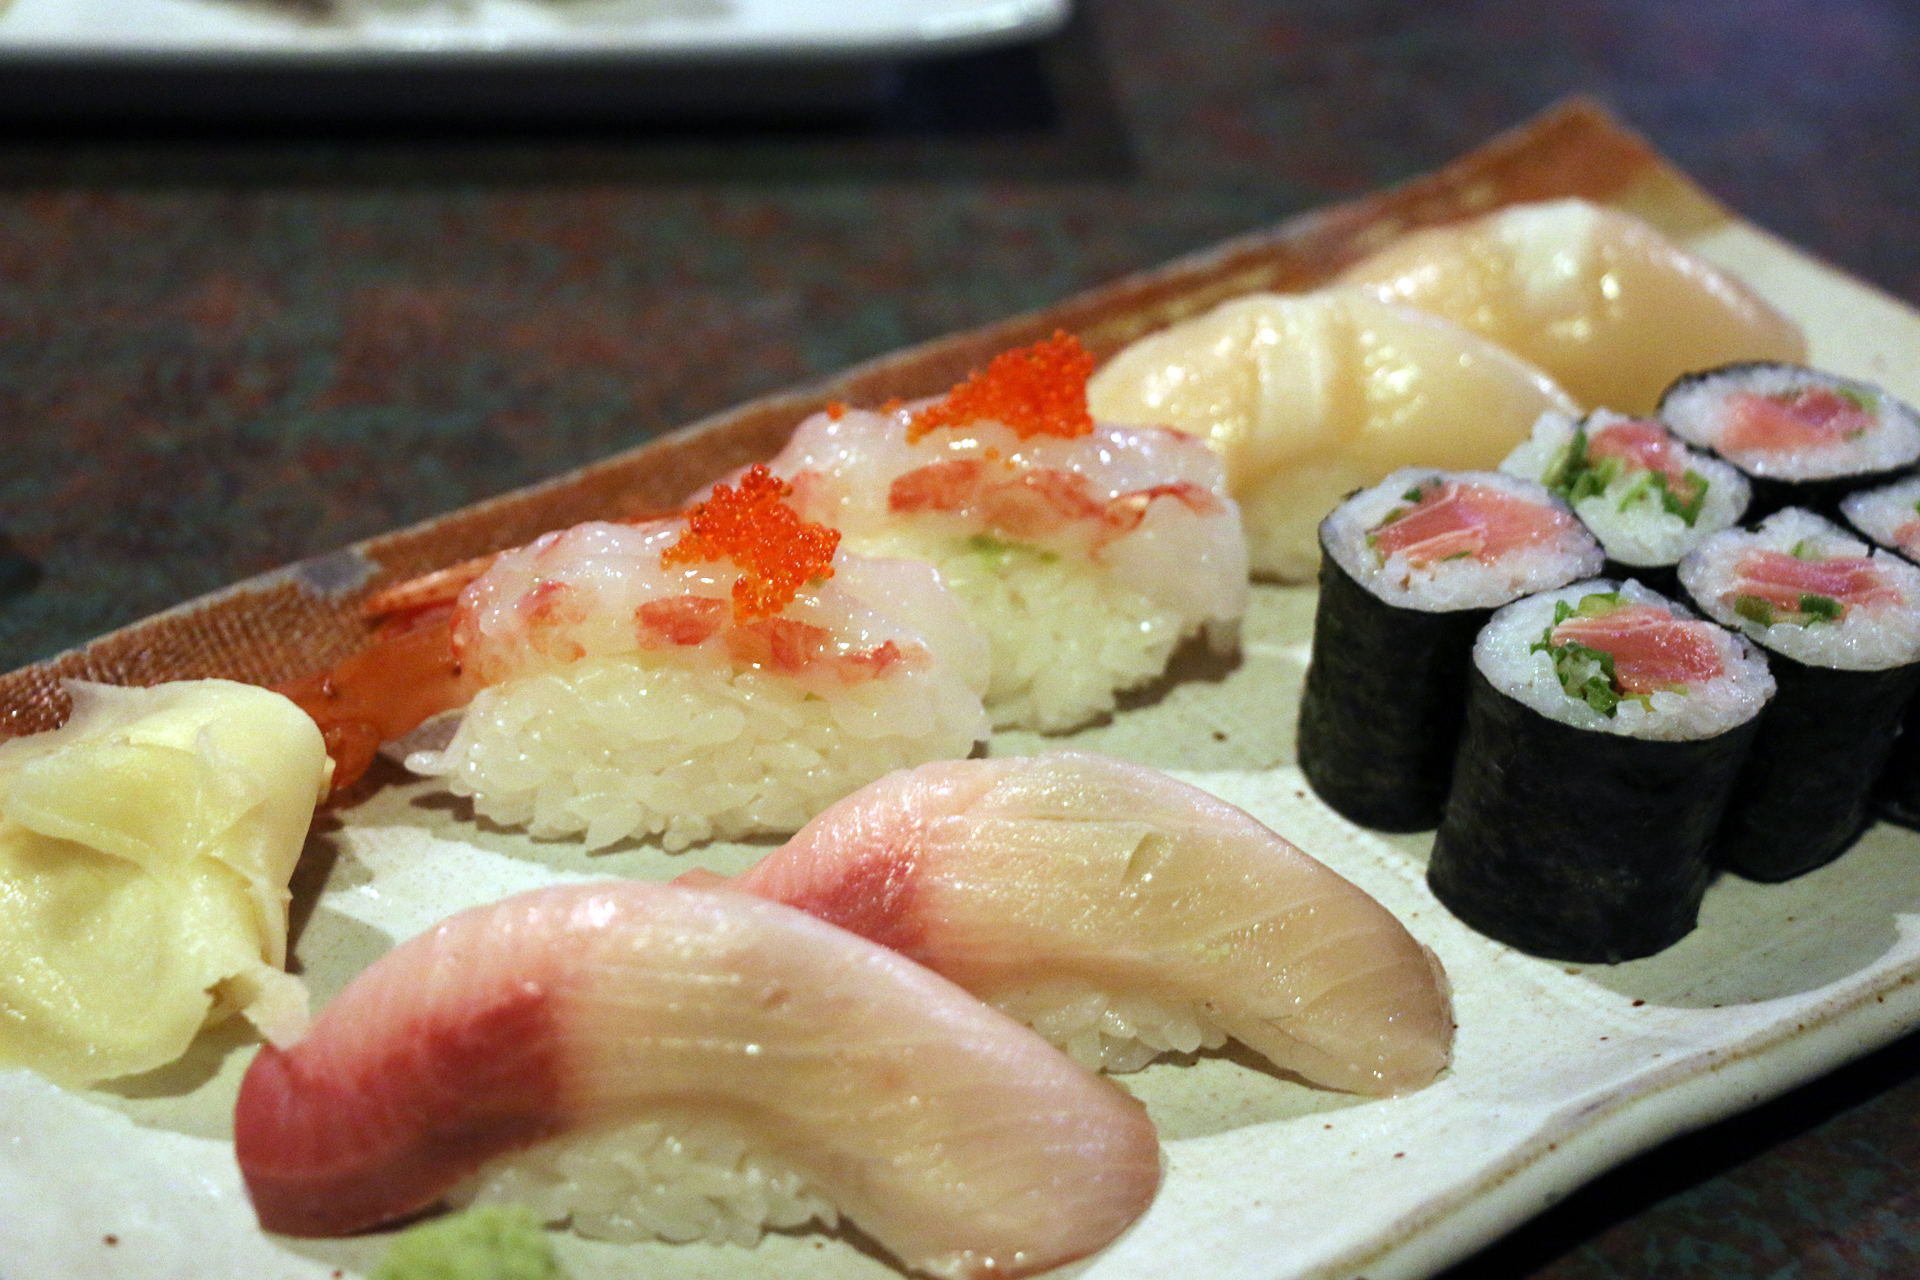  A selection of nigiri sushi and a negihama (yellowtail and scallion) roll.